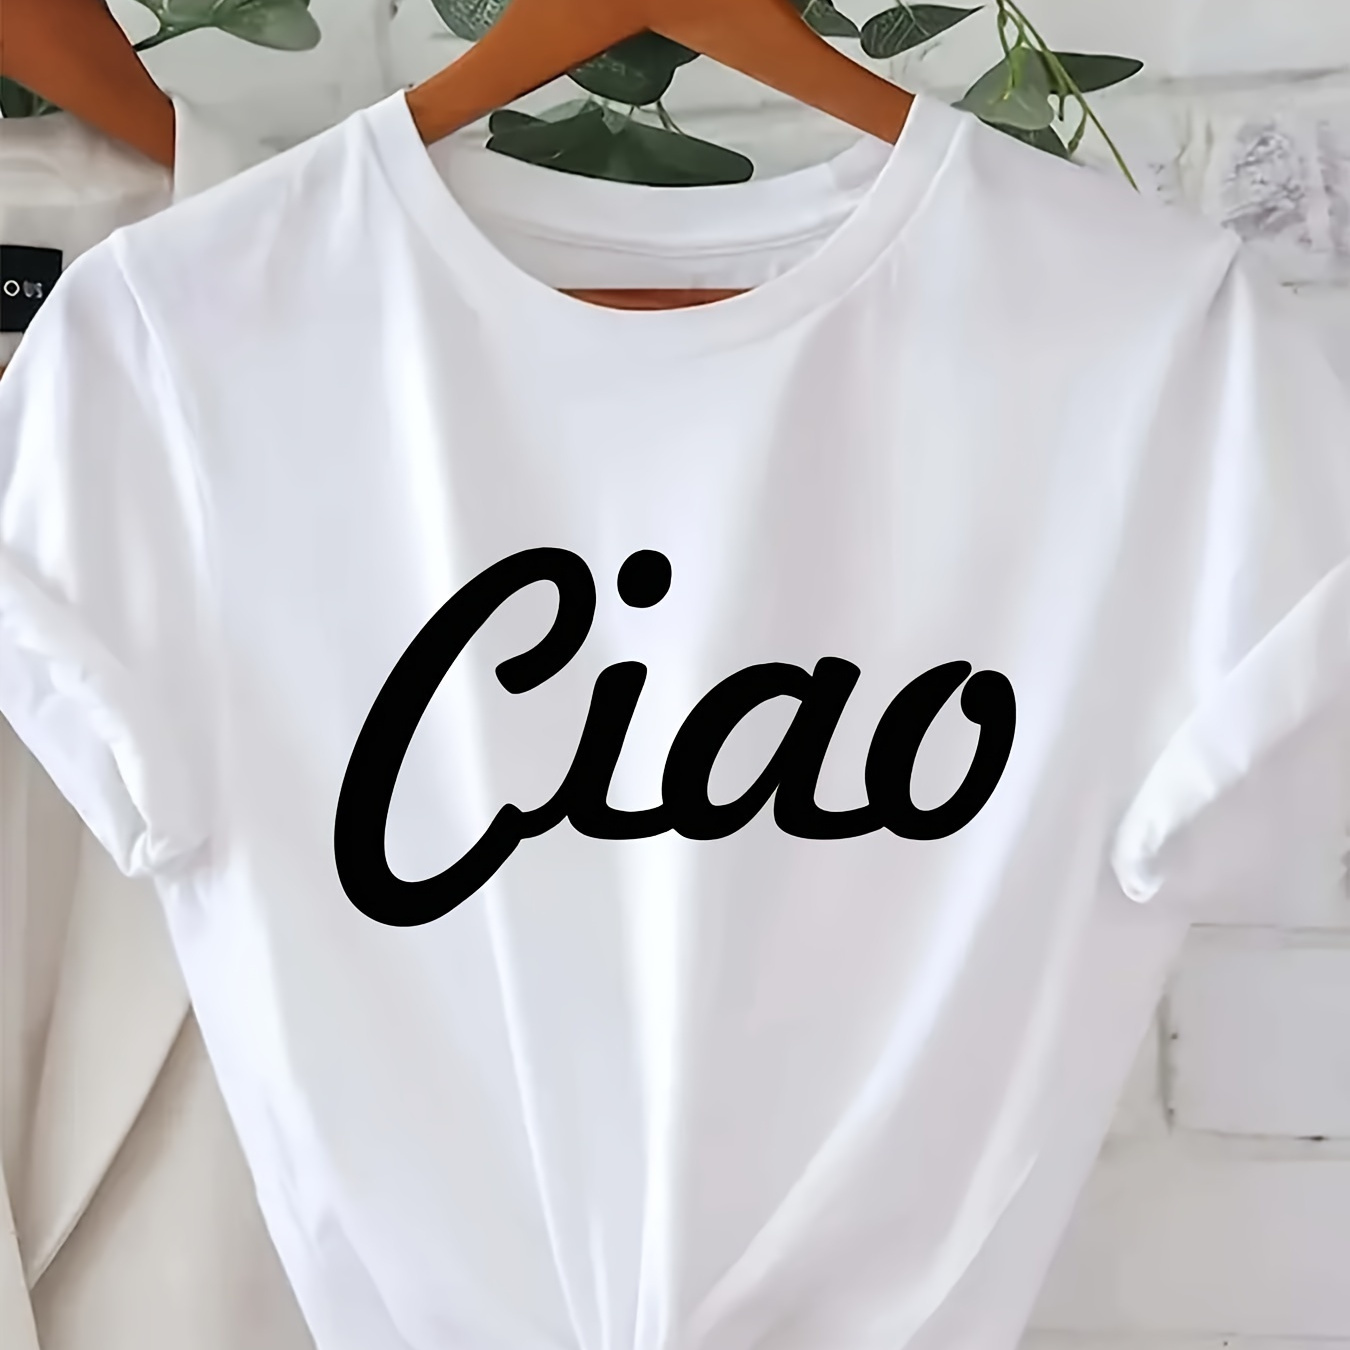 

Ciao Letter Print T-shirt, Casual Crew Neck Short Sleeve Top For Spring & Summer, Women's Clothing